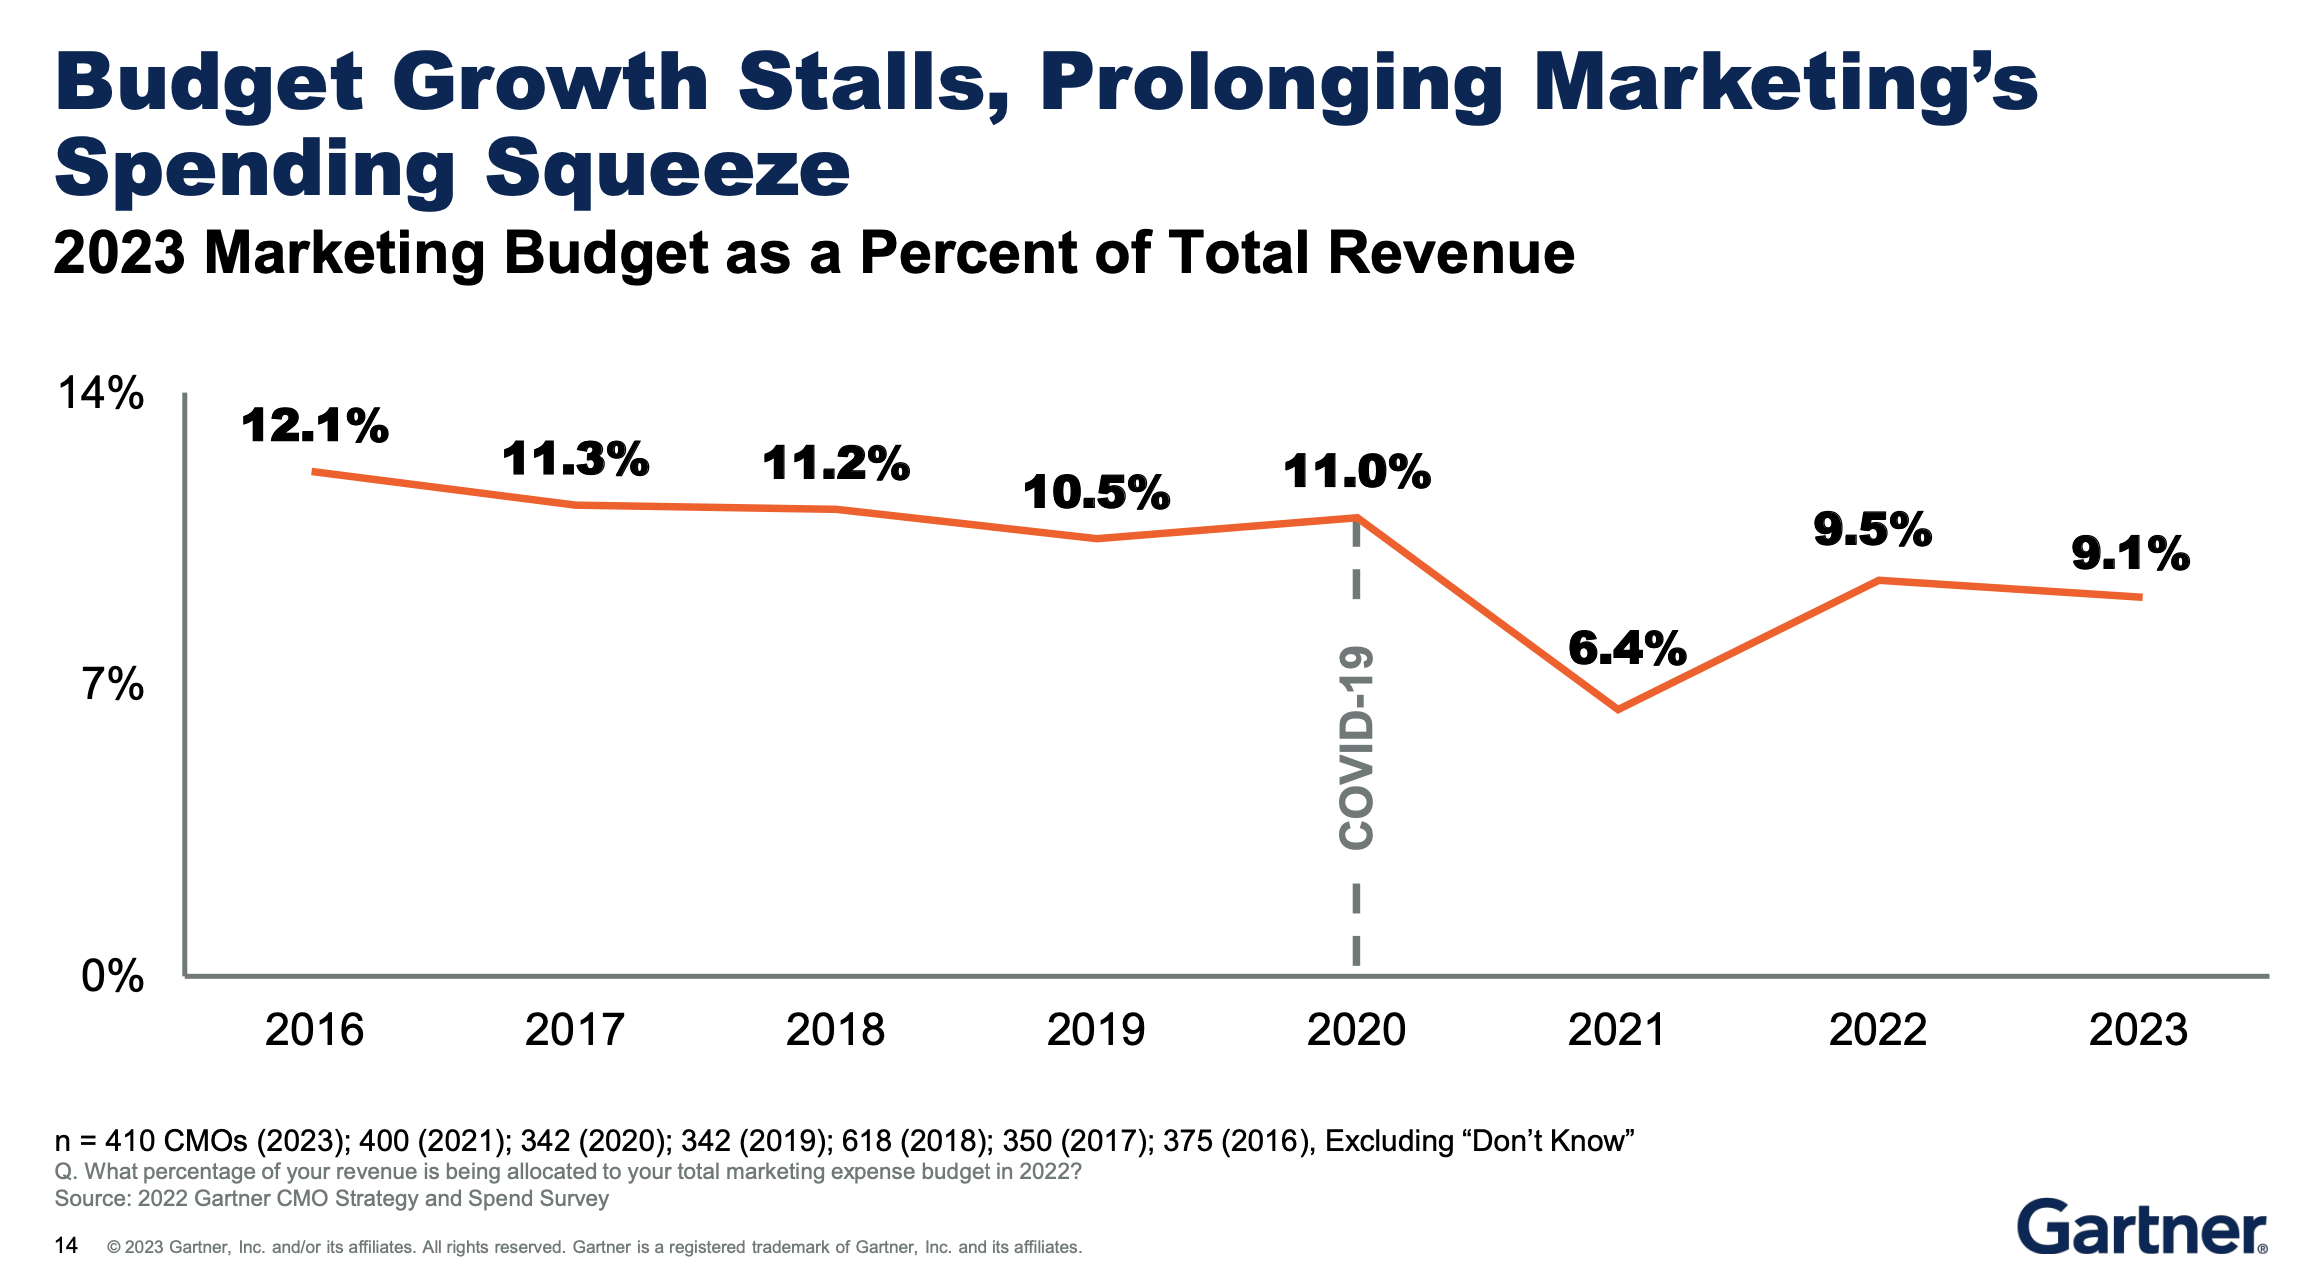 A screenshot from the 2023 Gartner CMO Strategy and Spend Survey. It depicts marketing budget as a percent of total revenue over time.